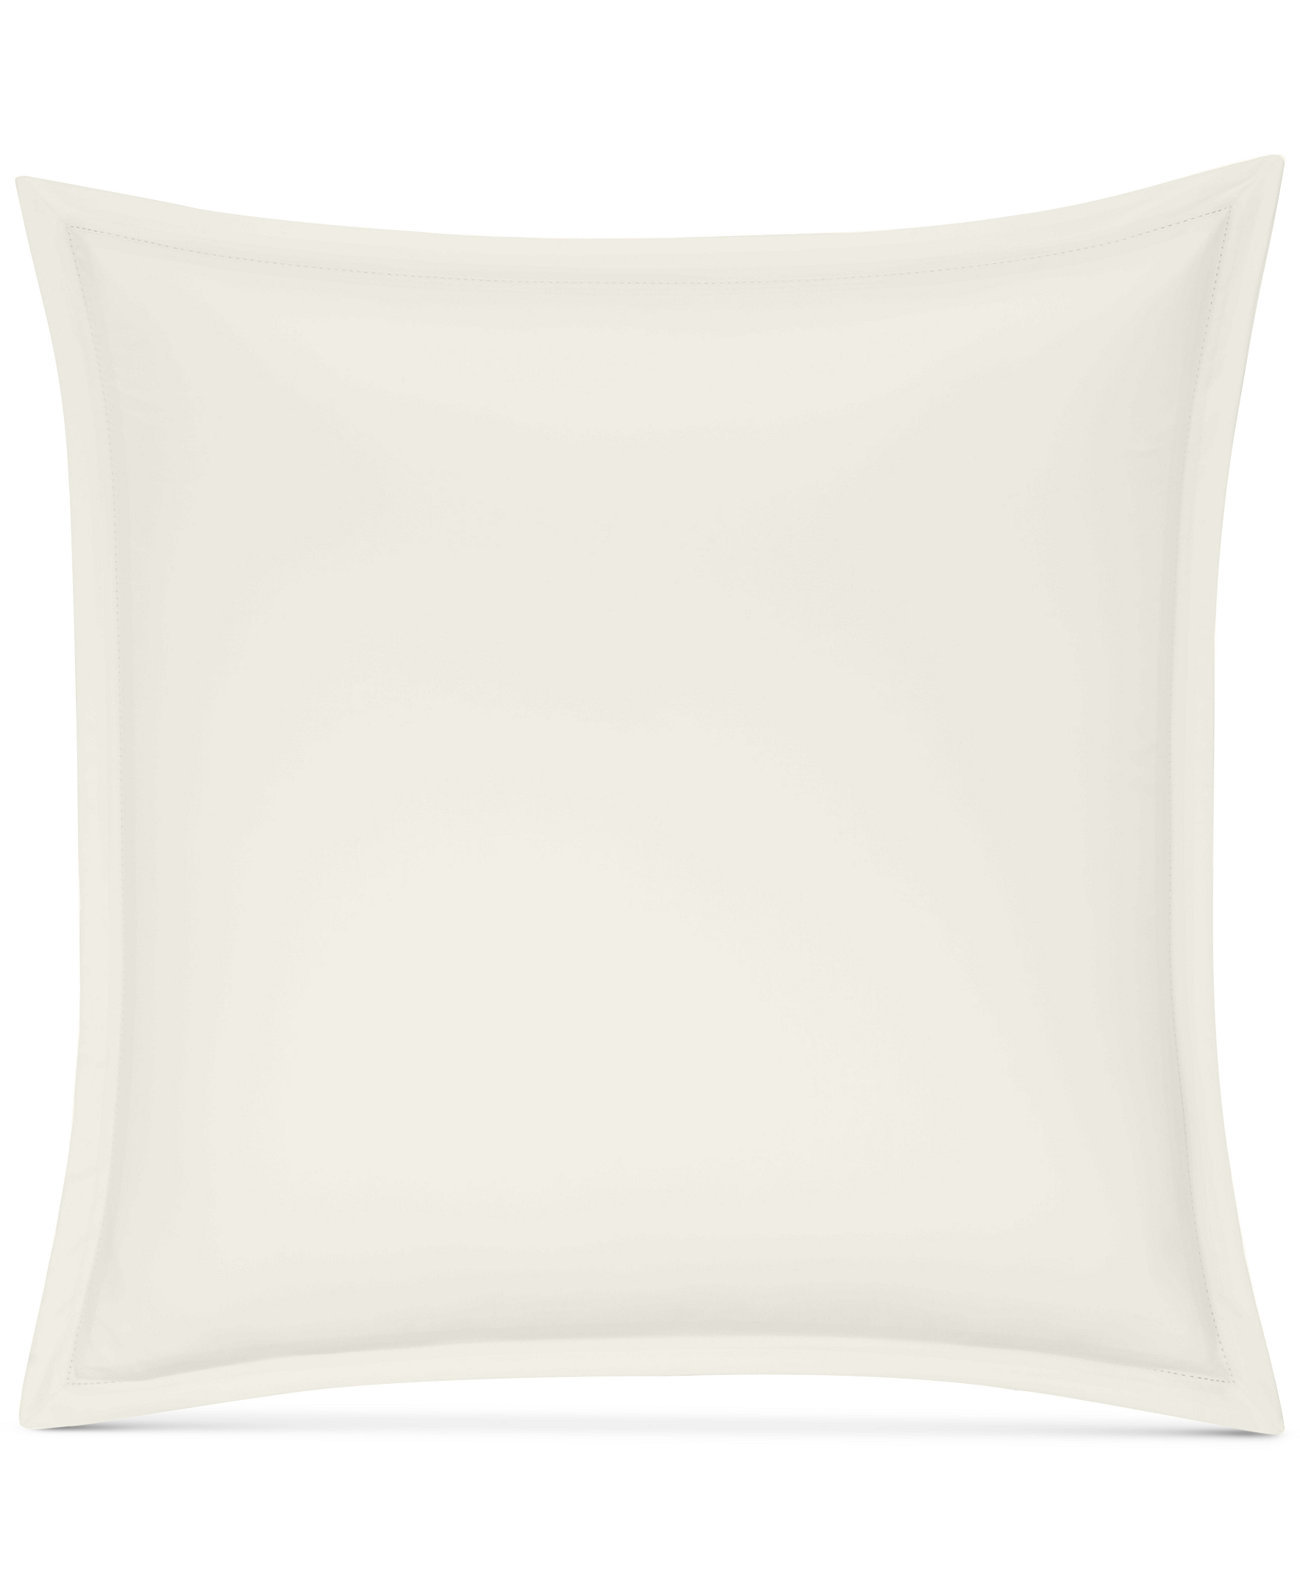 Supima Cotton 1000-Thread Count 2-Pc. Euro Sham Set, Created for Macy's Hotel Collection